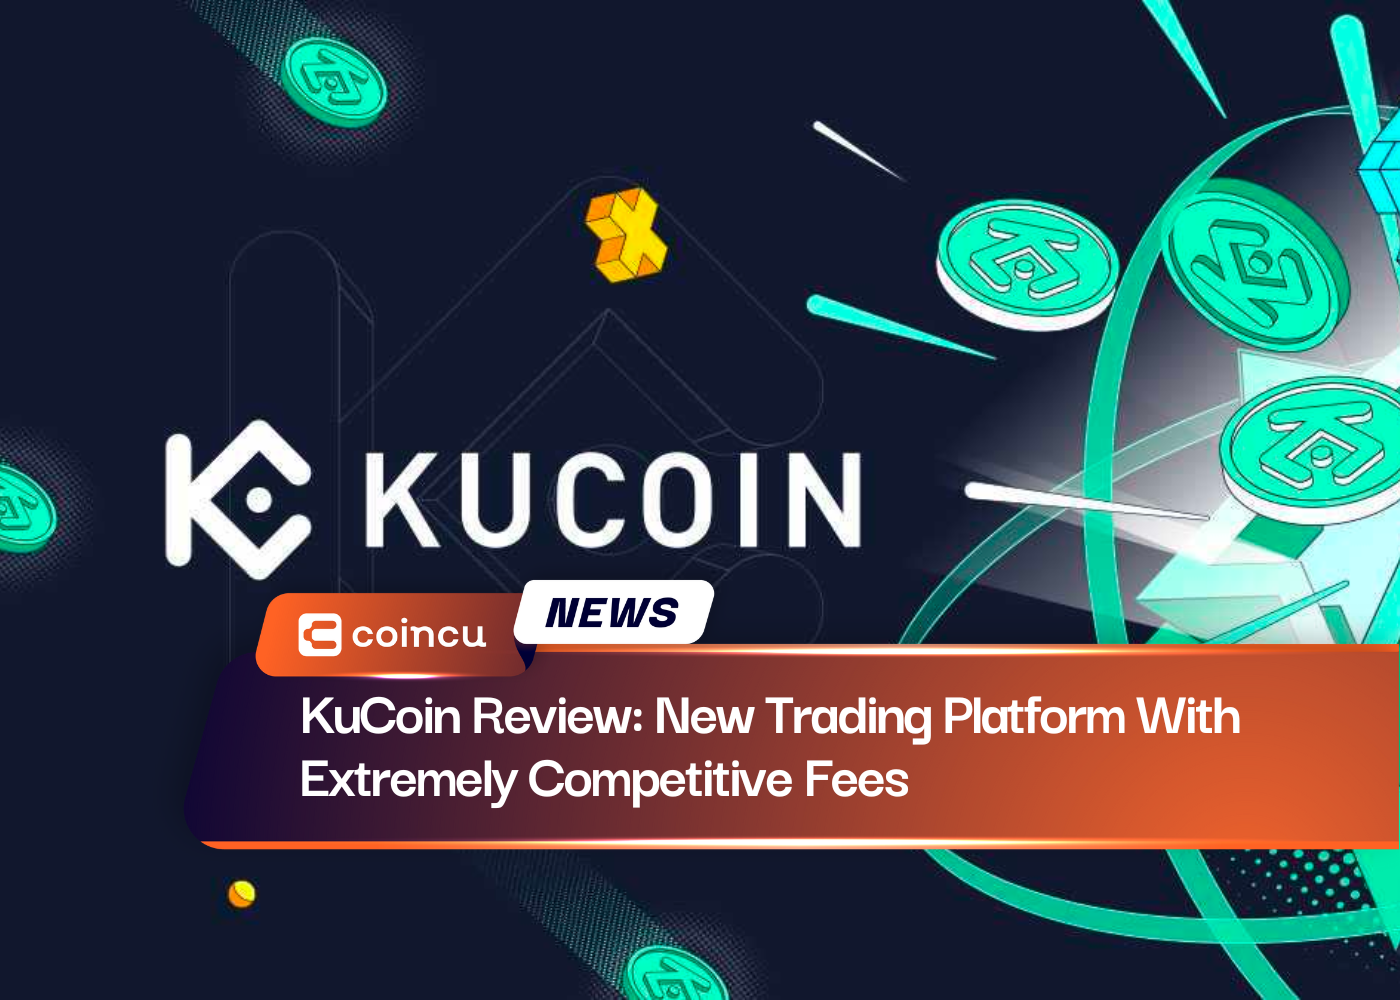 KuCoin Review: New Trading Platform With Extremely Competitive Fees